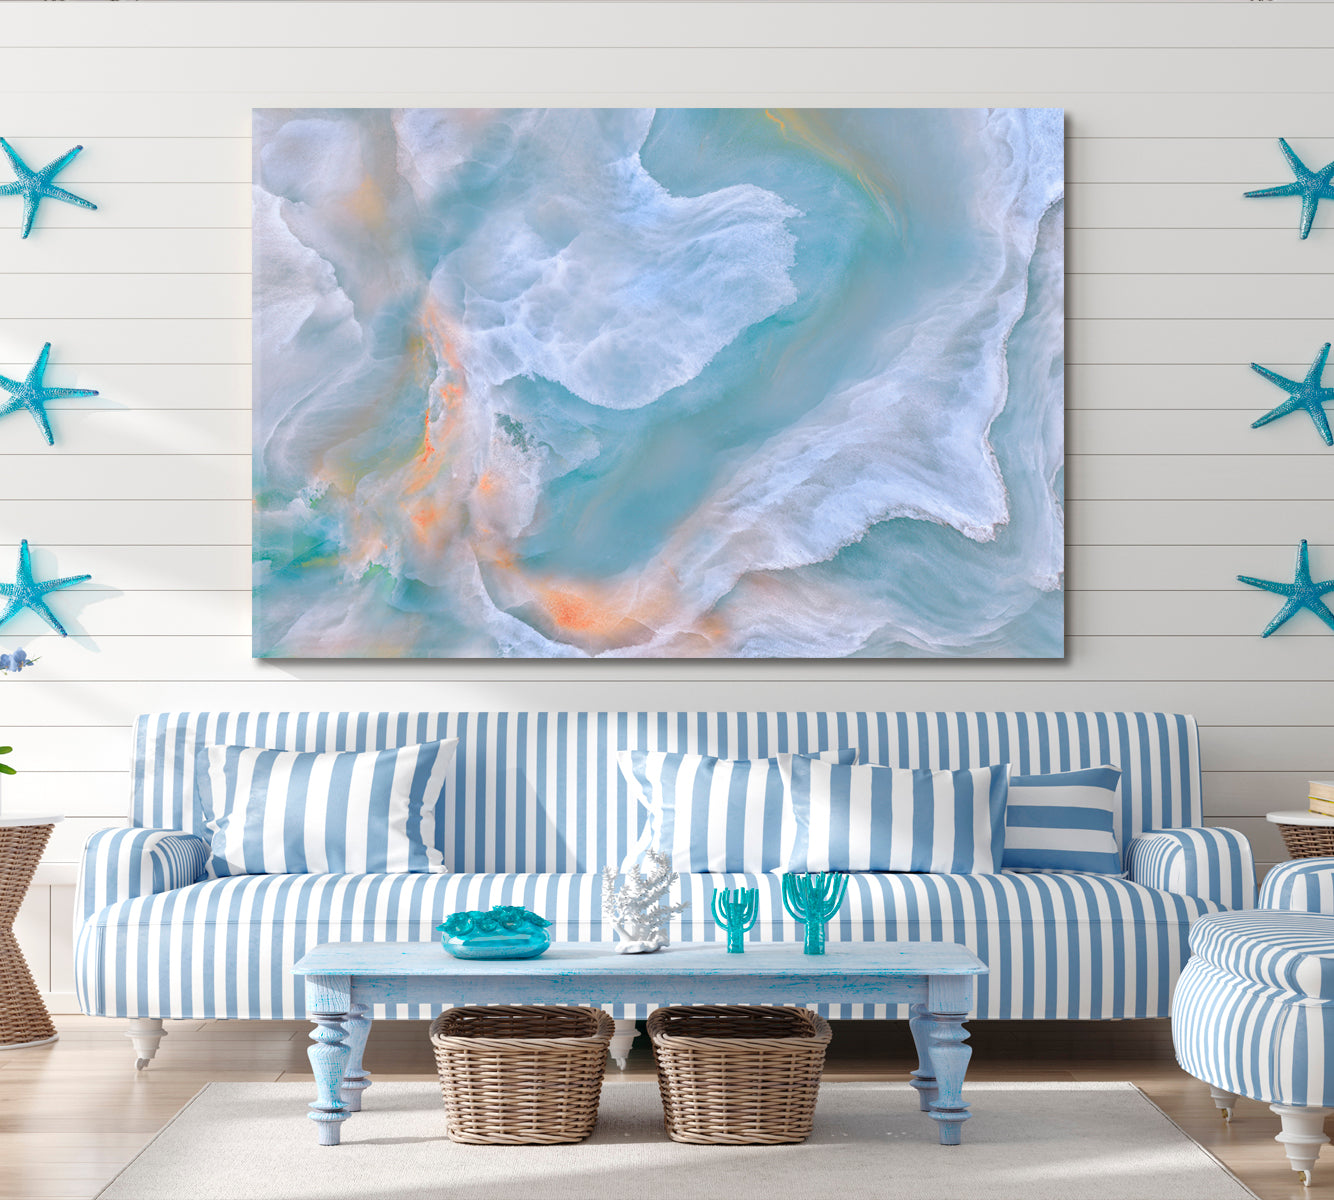 Cloudy Abstract Onyx Marble Veins Free-flowing Natural Luxury Artwork Fluid Art, Oriental Marbling Canvas Print Artesty   